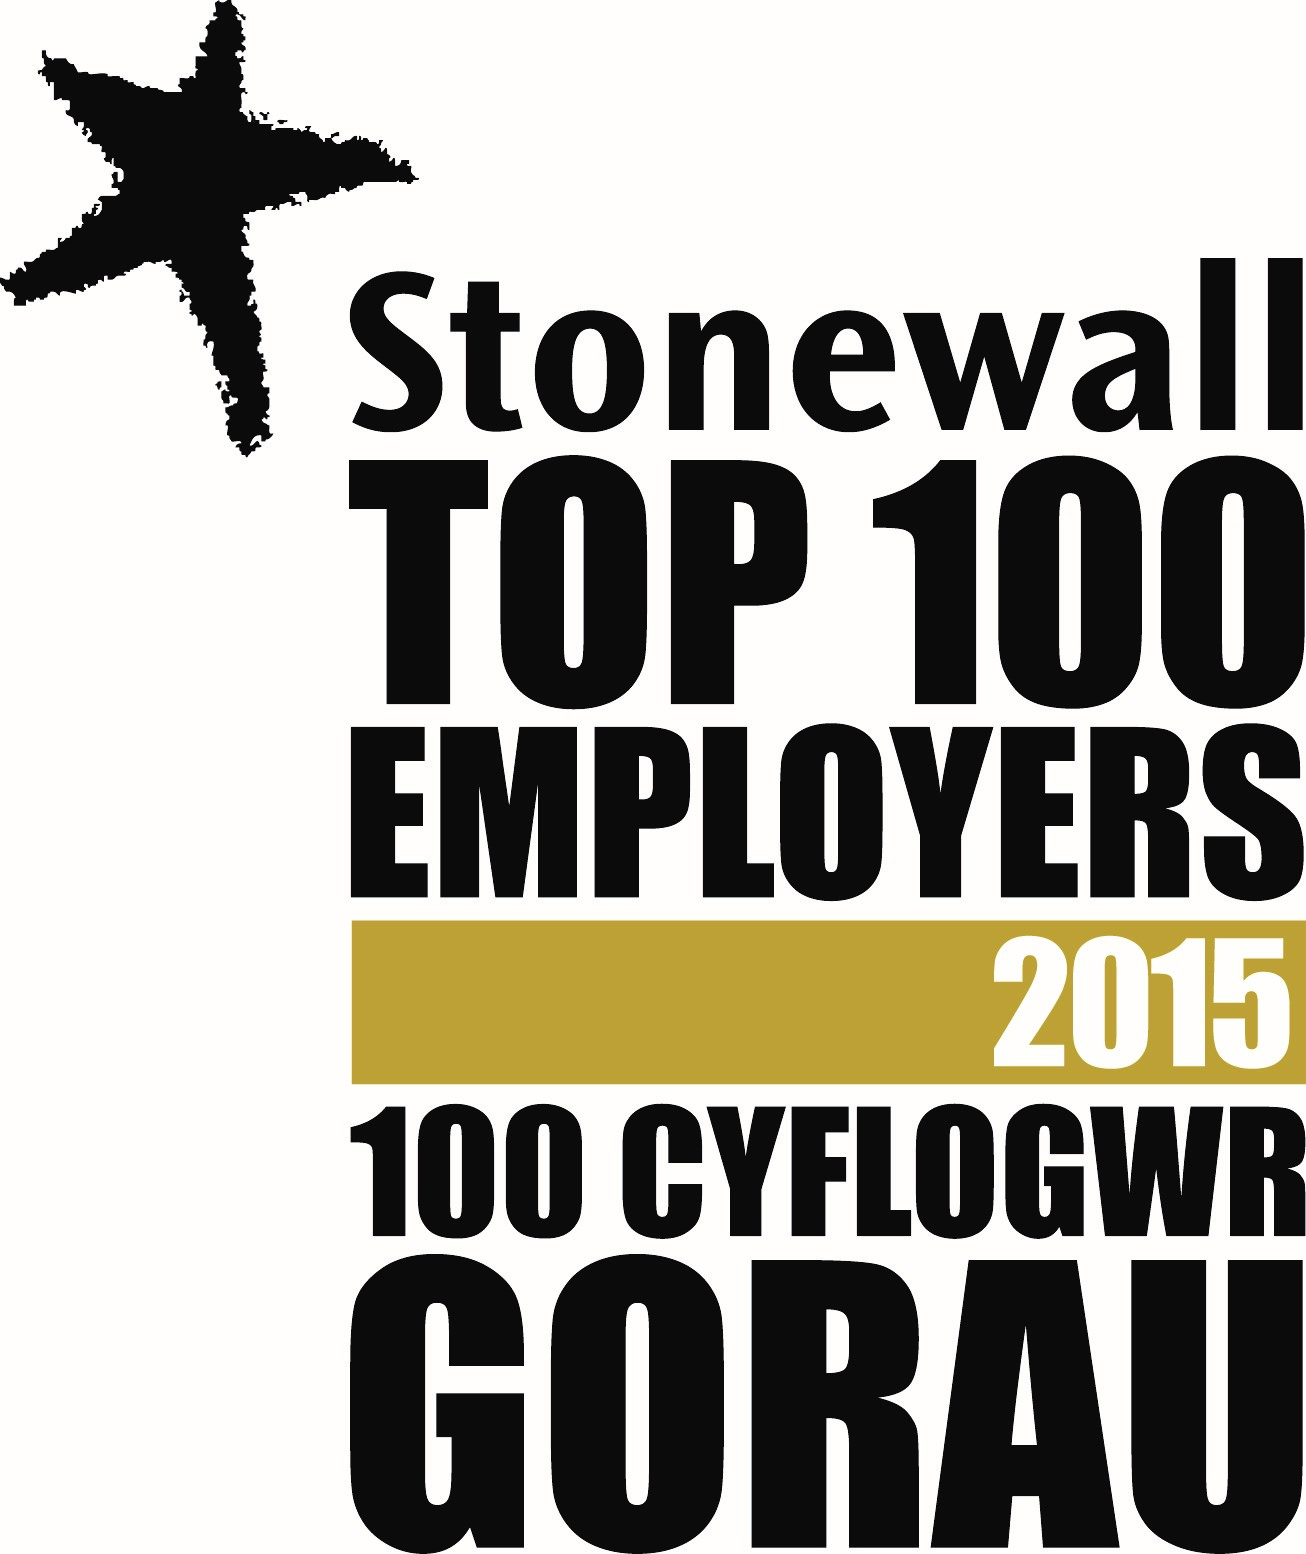 Stonewall top 100 employers 2015